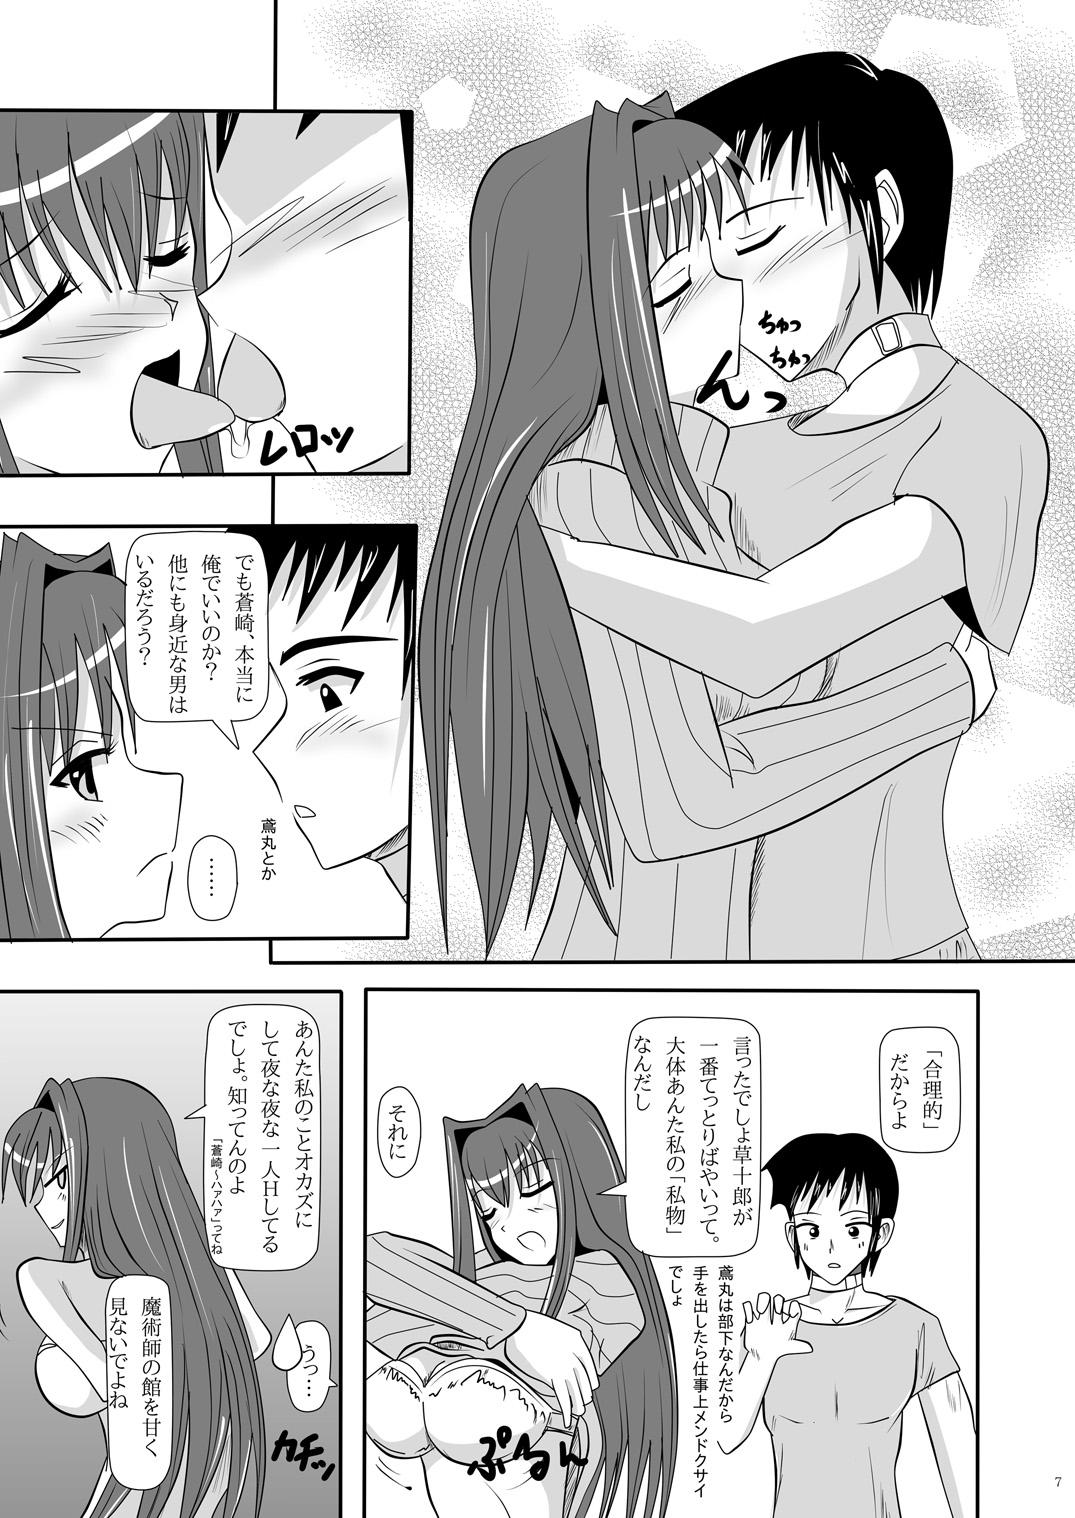 Roughsex smells like teen spirit - Mahou tsukai no yoru | witch on the holy night Sixtynine - Page 8